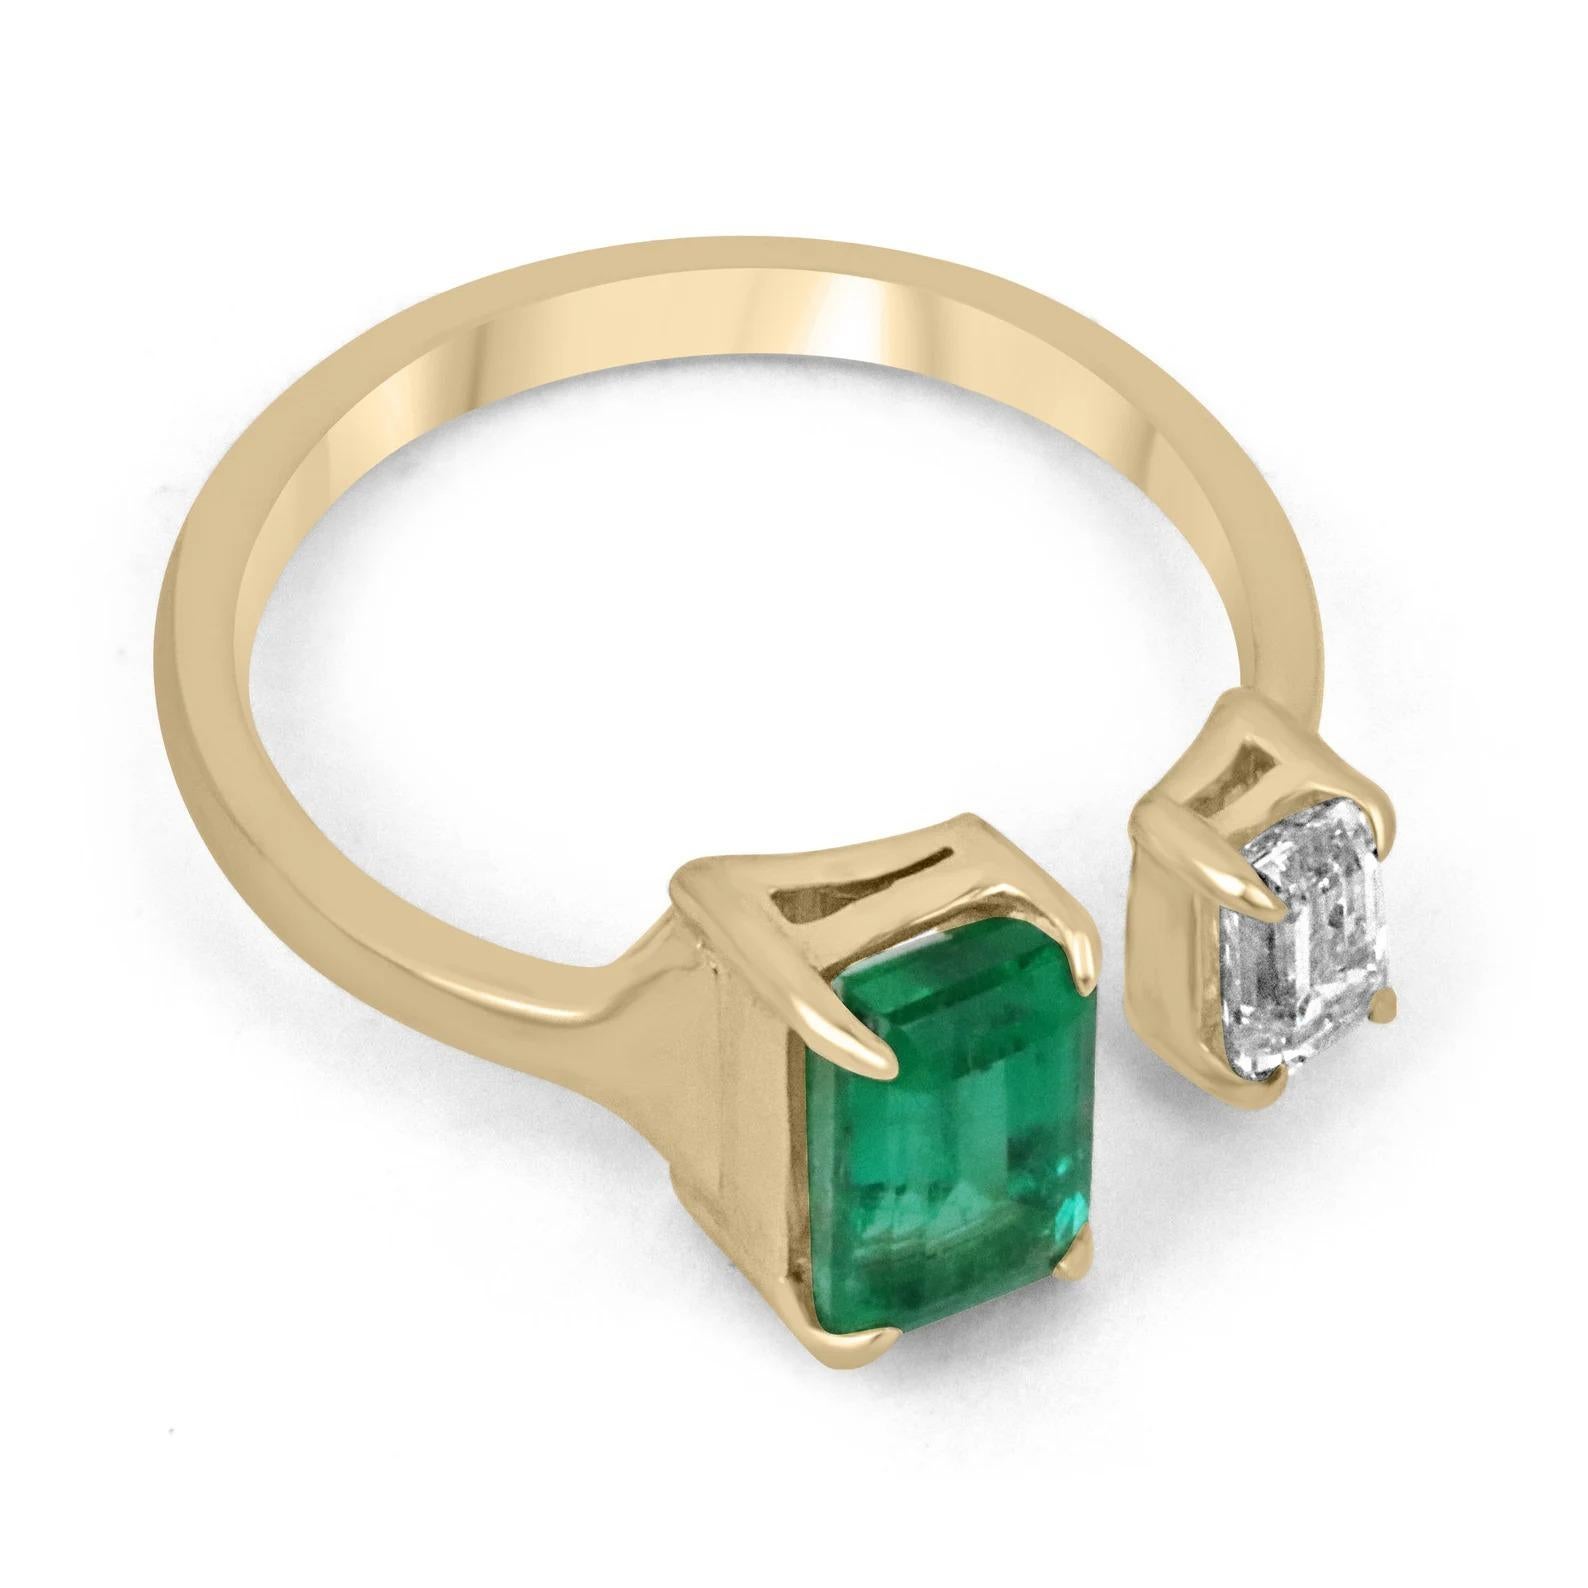 This is a stunning solid 18K yellow gold, AAA heirloom Colombian emerald, and diamond statement ring or right-hand ring. Absolutely stylish and sleek, ideal as a stand-alone piece or worn with other statement pieces. An emerald-cut Colombian emerald